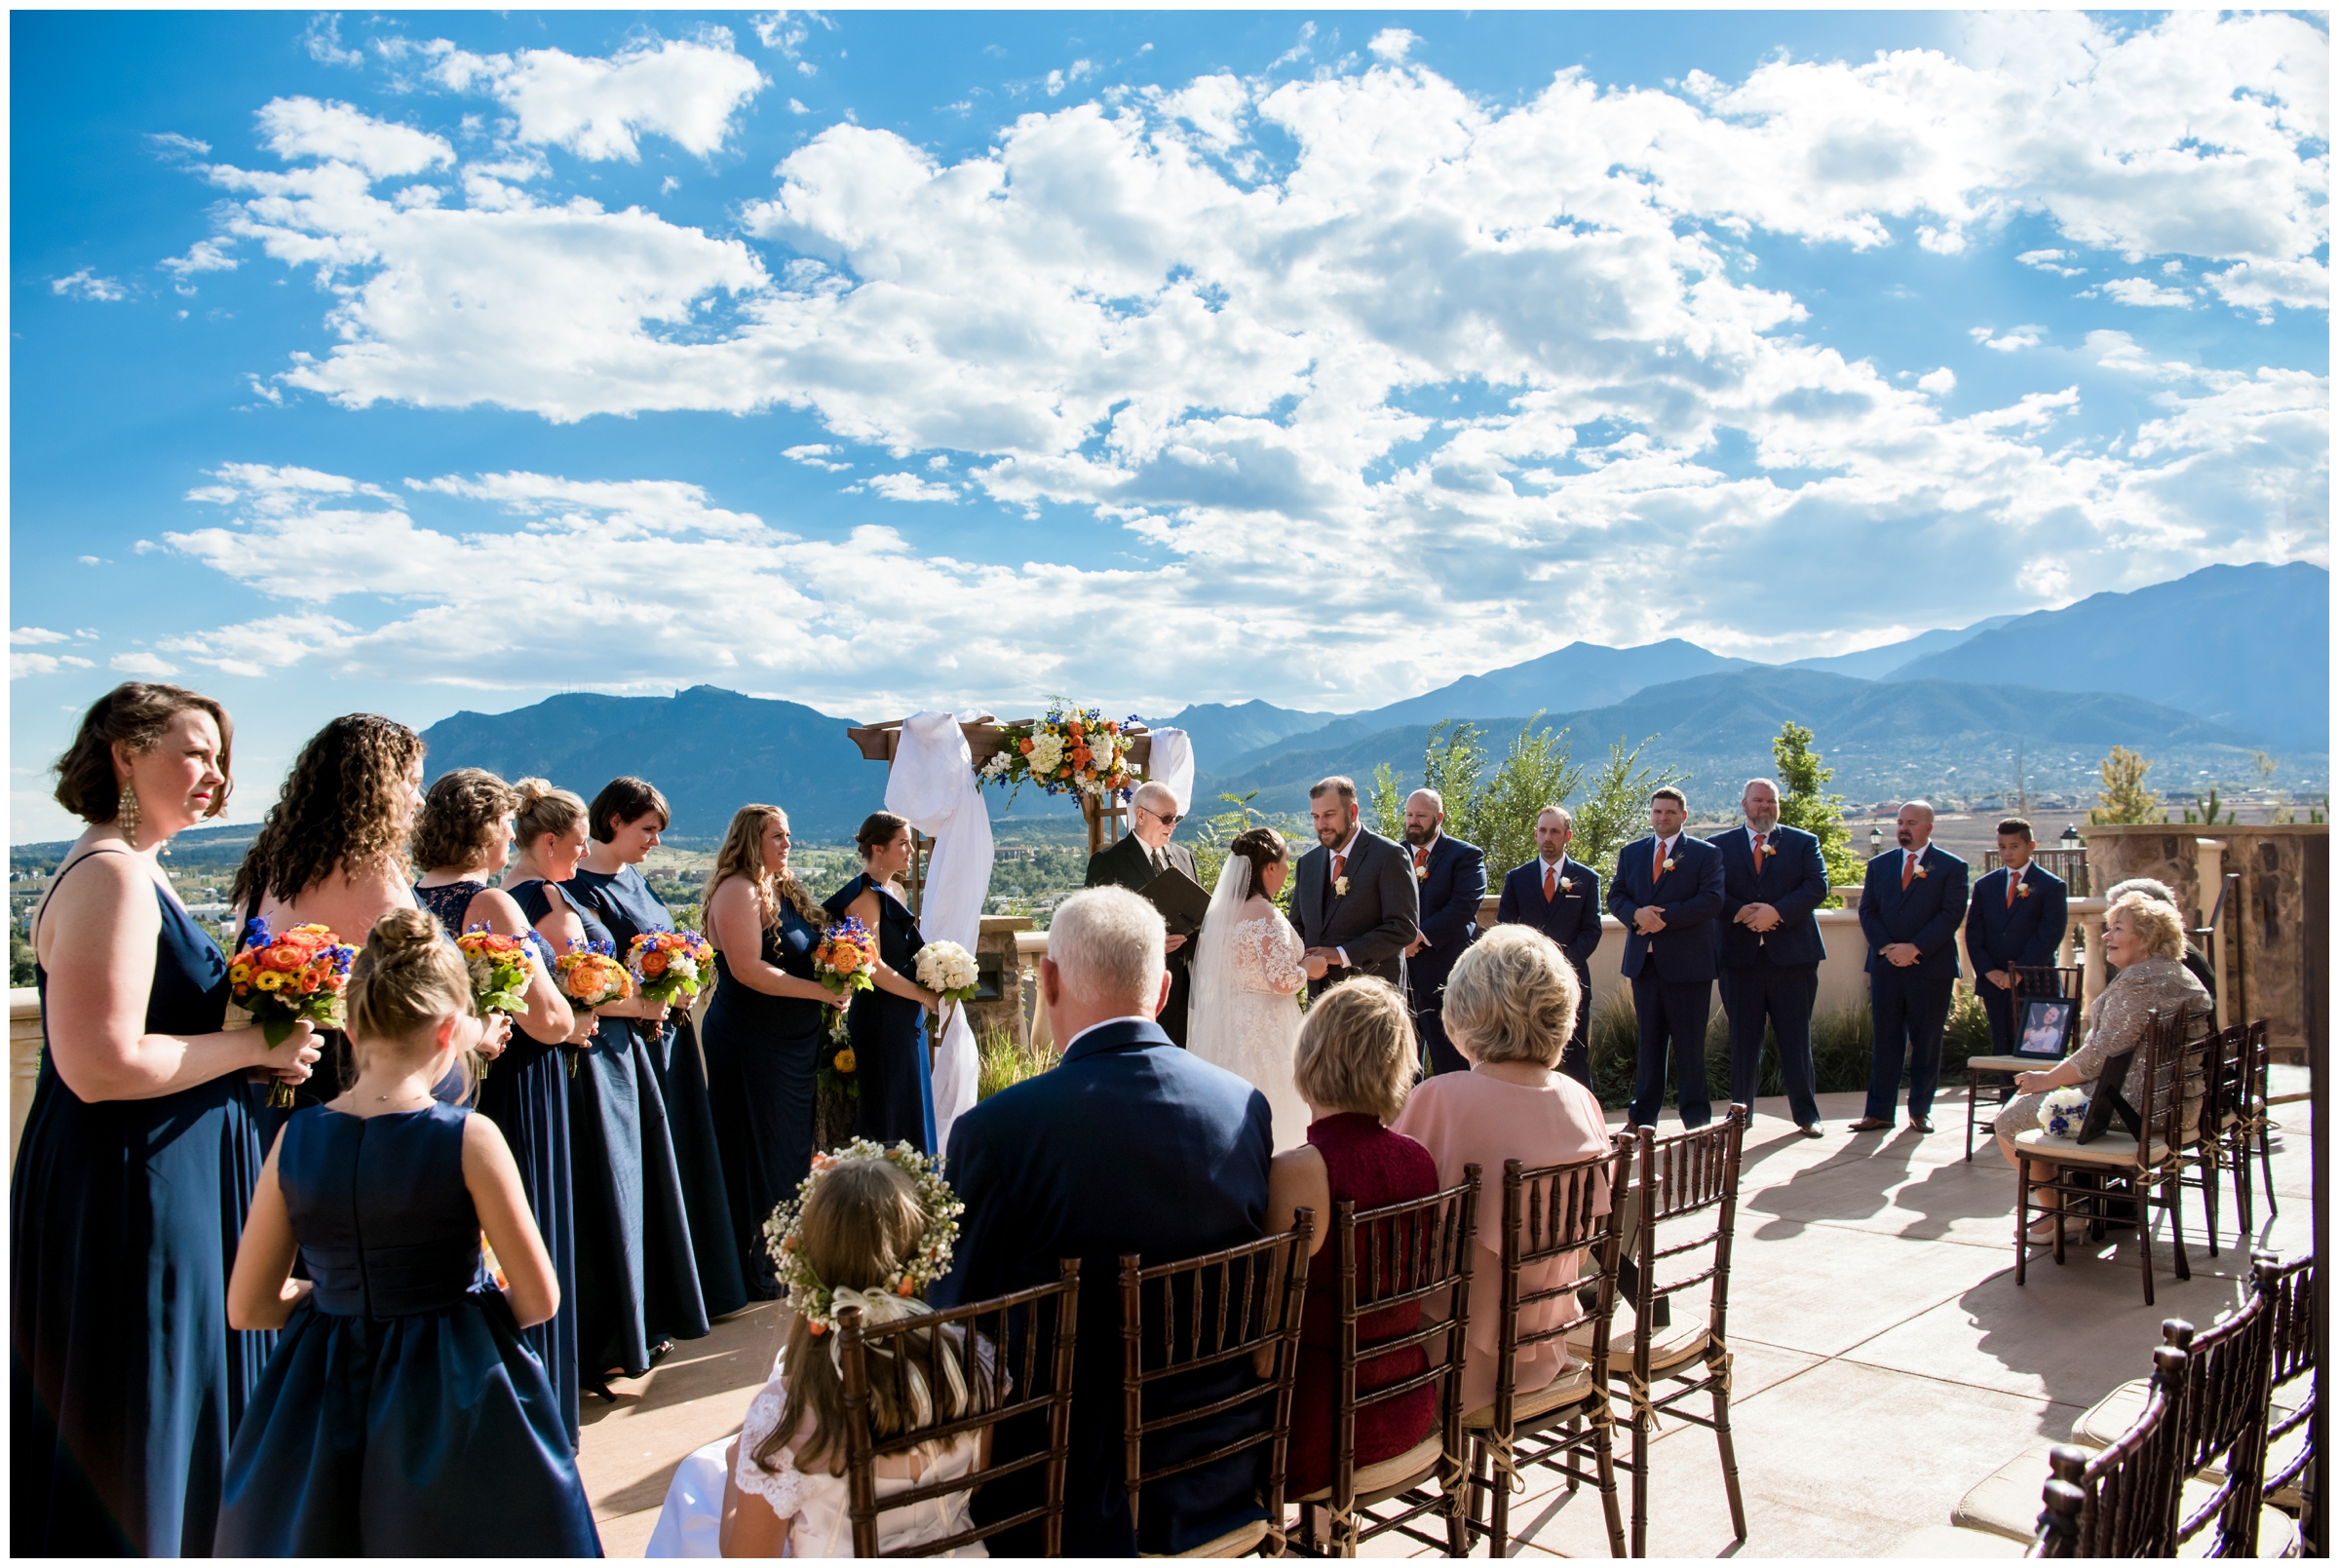 The Pinery at the Hill Colorado Springs outdoor wedding ceremony 